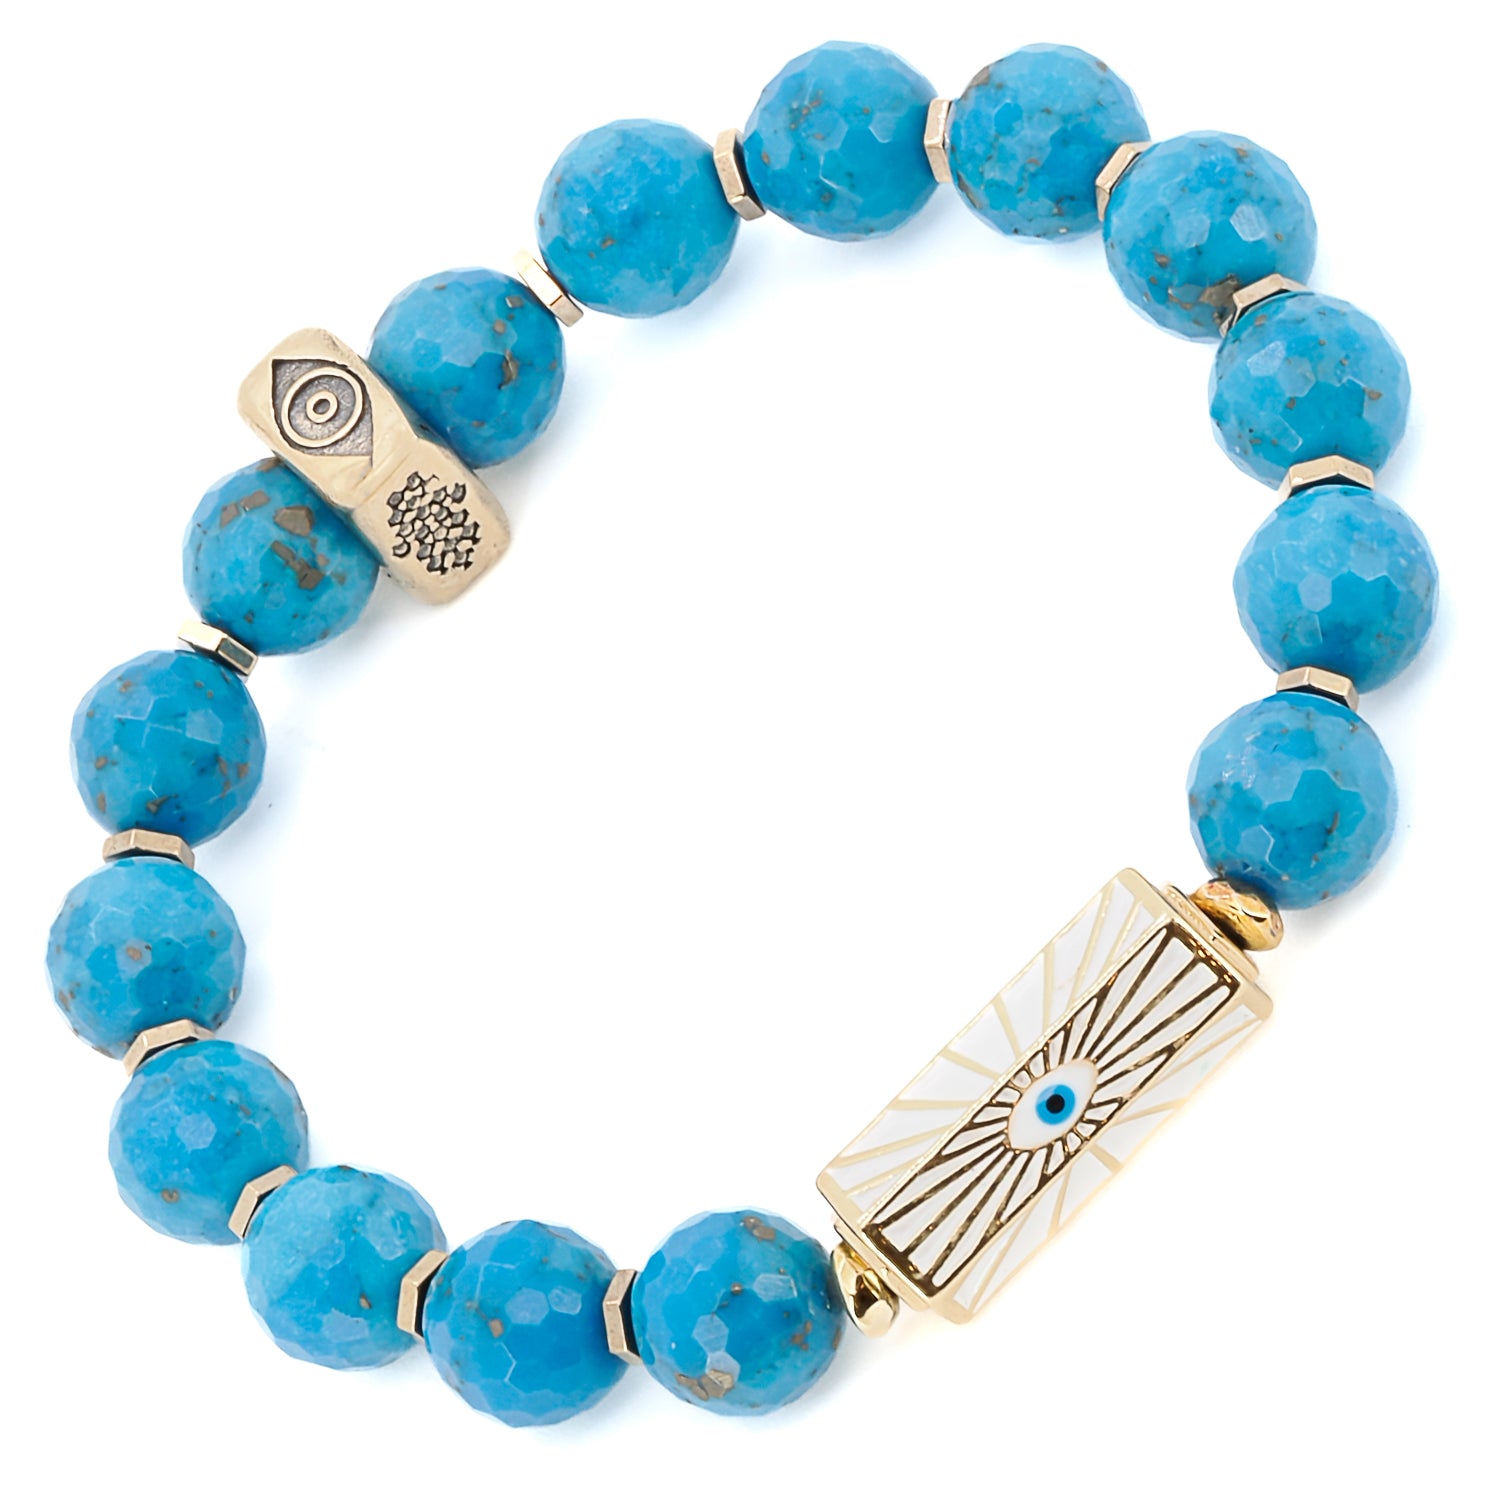 The Turquoise Luck and Protection Bracelet is a stunning accessory that combines elegance and spiritual meaning.